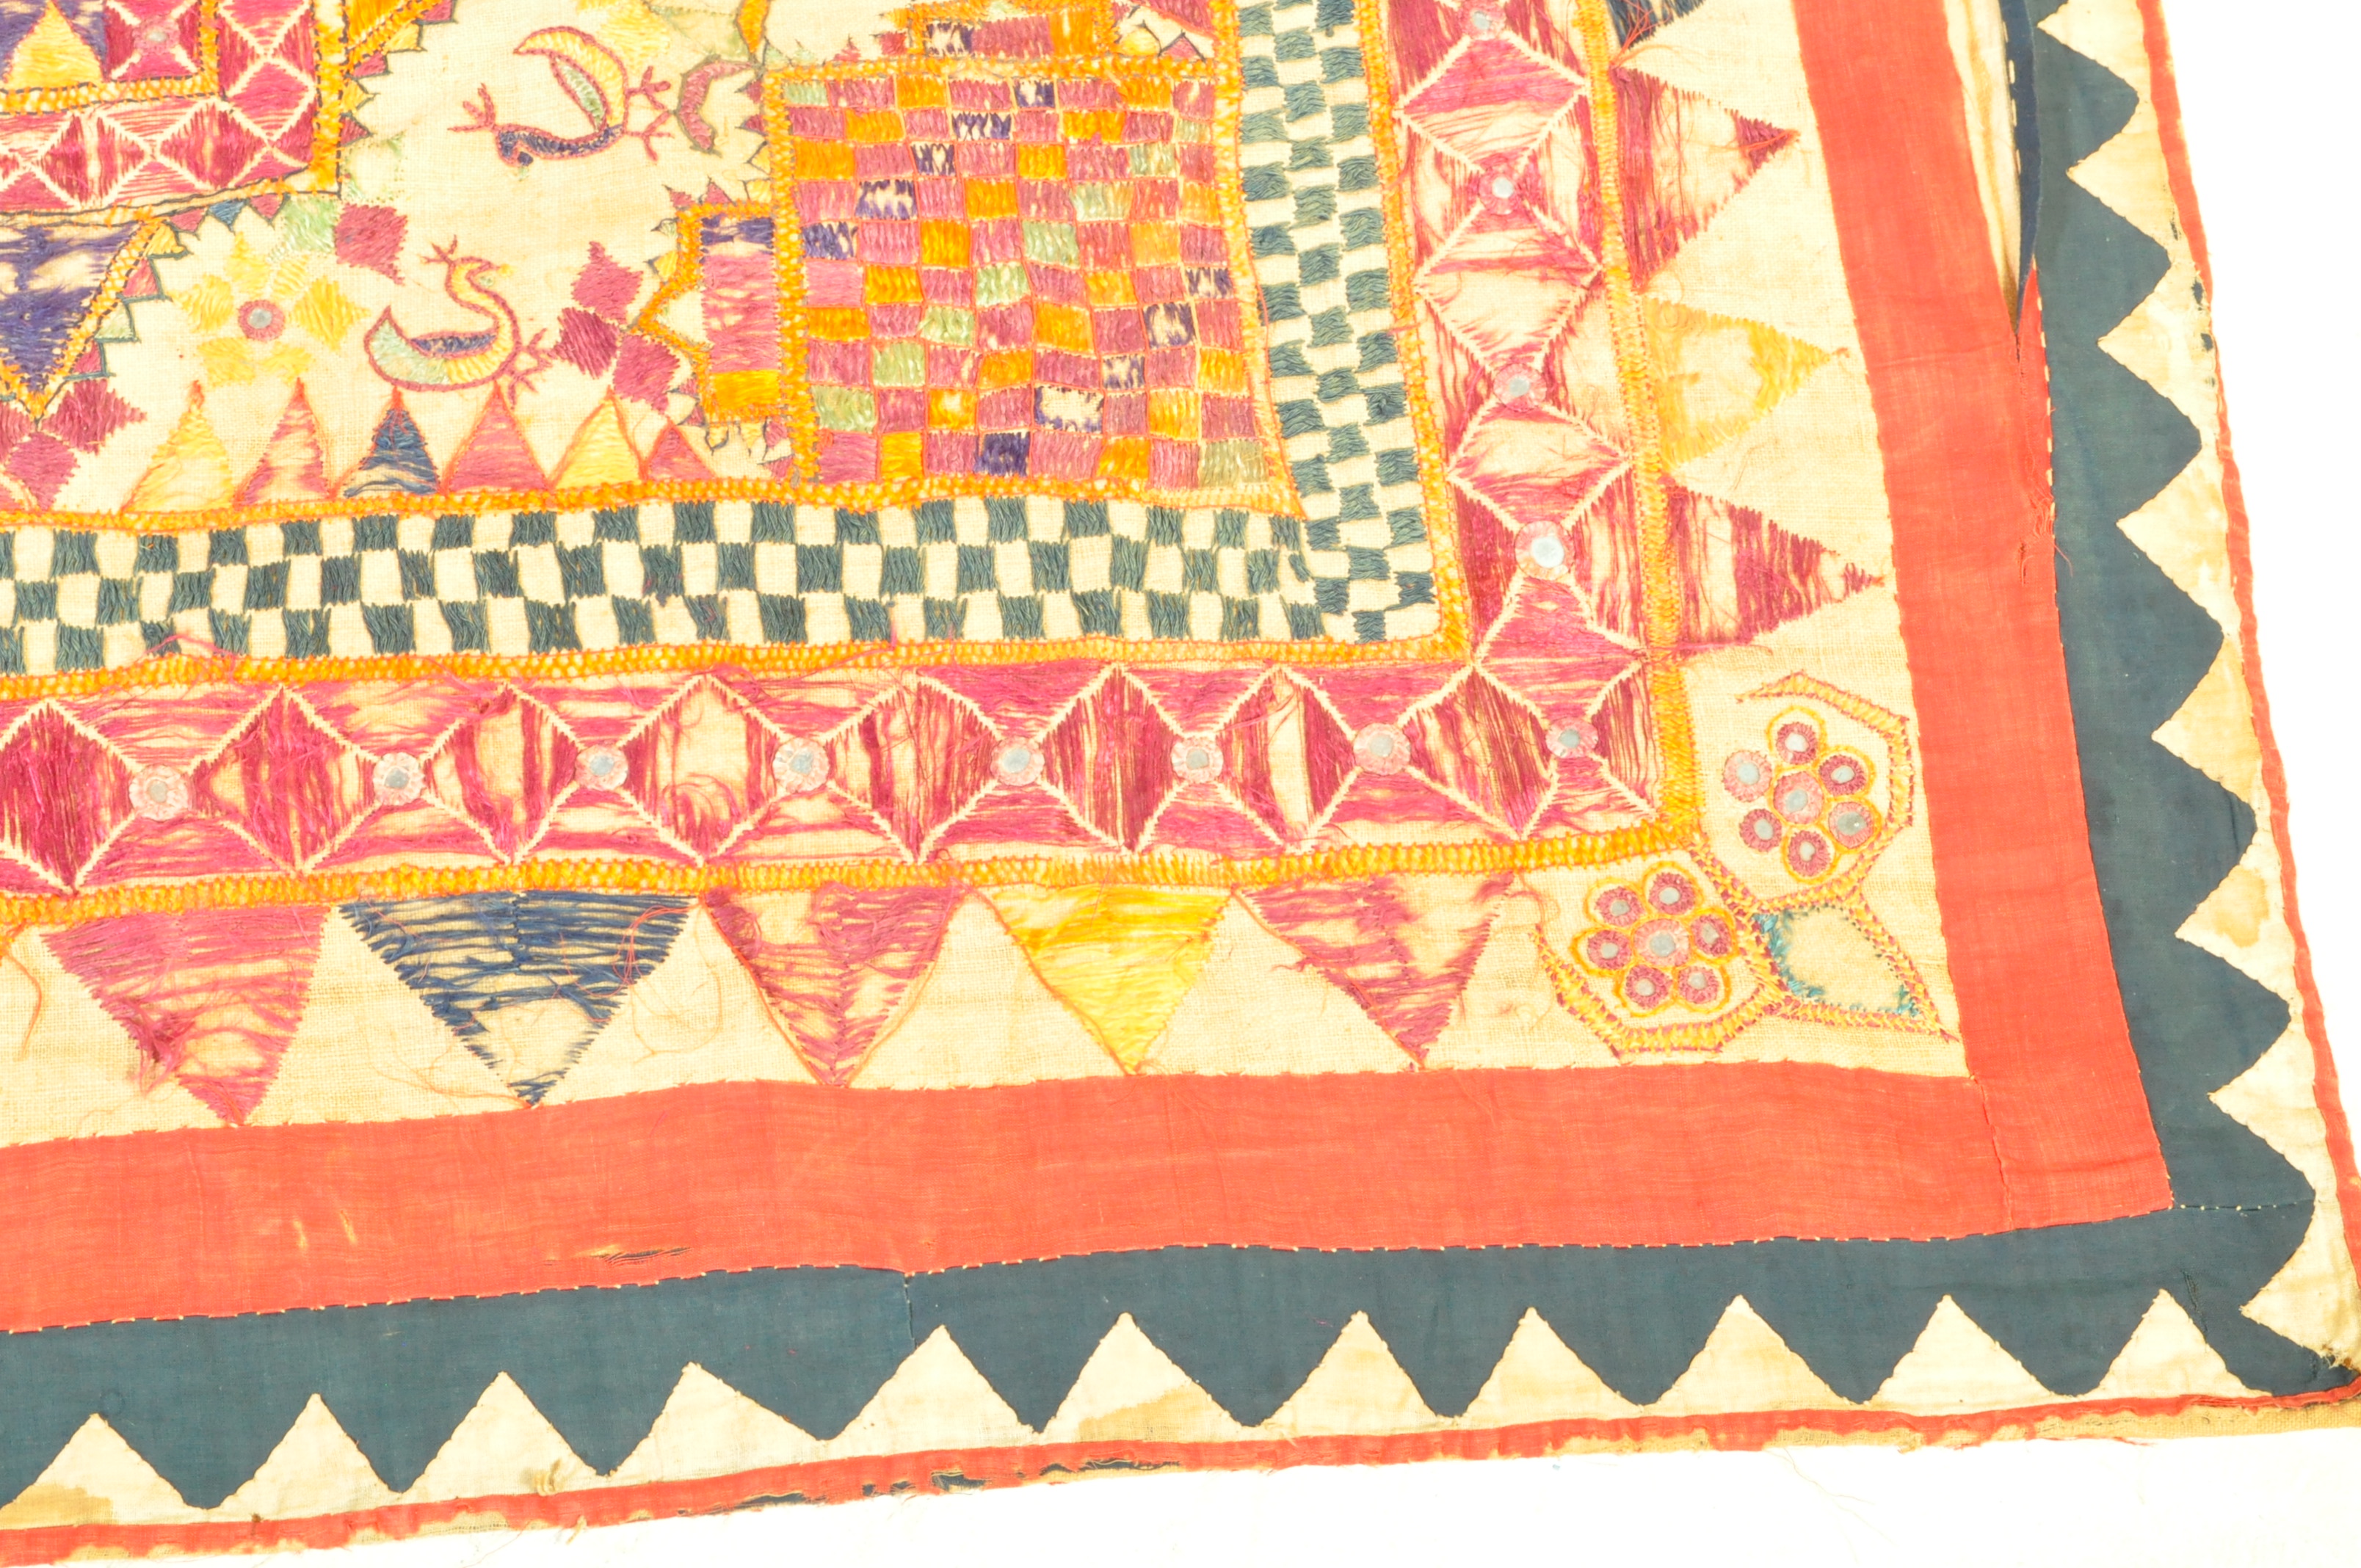 EARLY 20TH CENTURY INDIAN EMBROIDERED SHISHA TEXTILE - Image 5 of 7